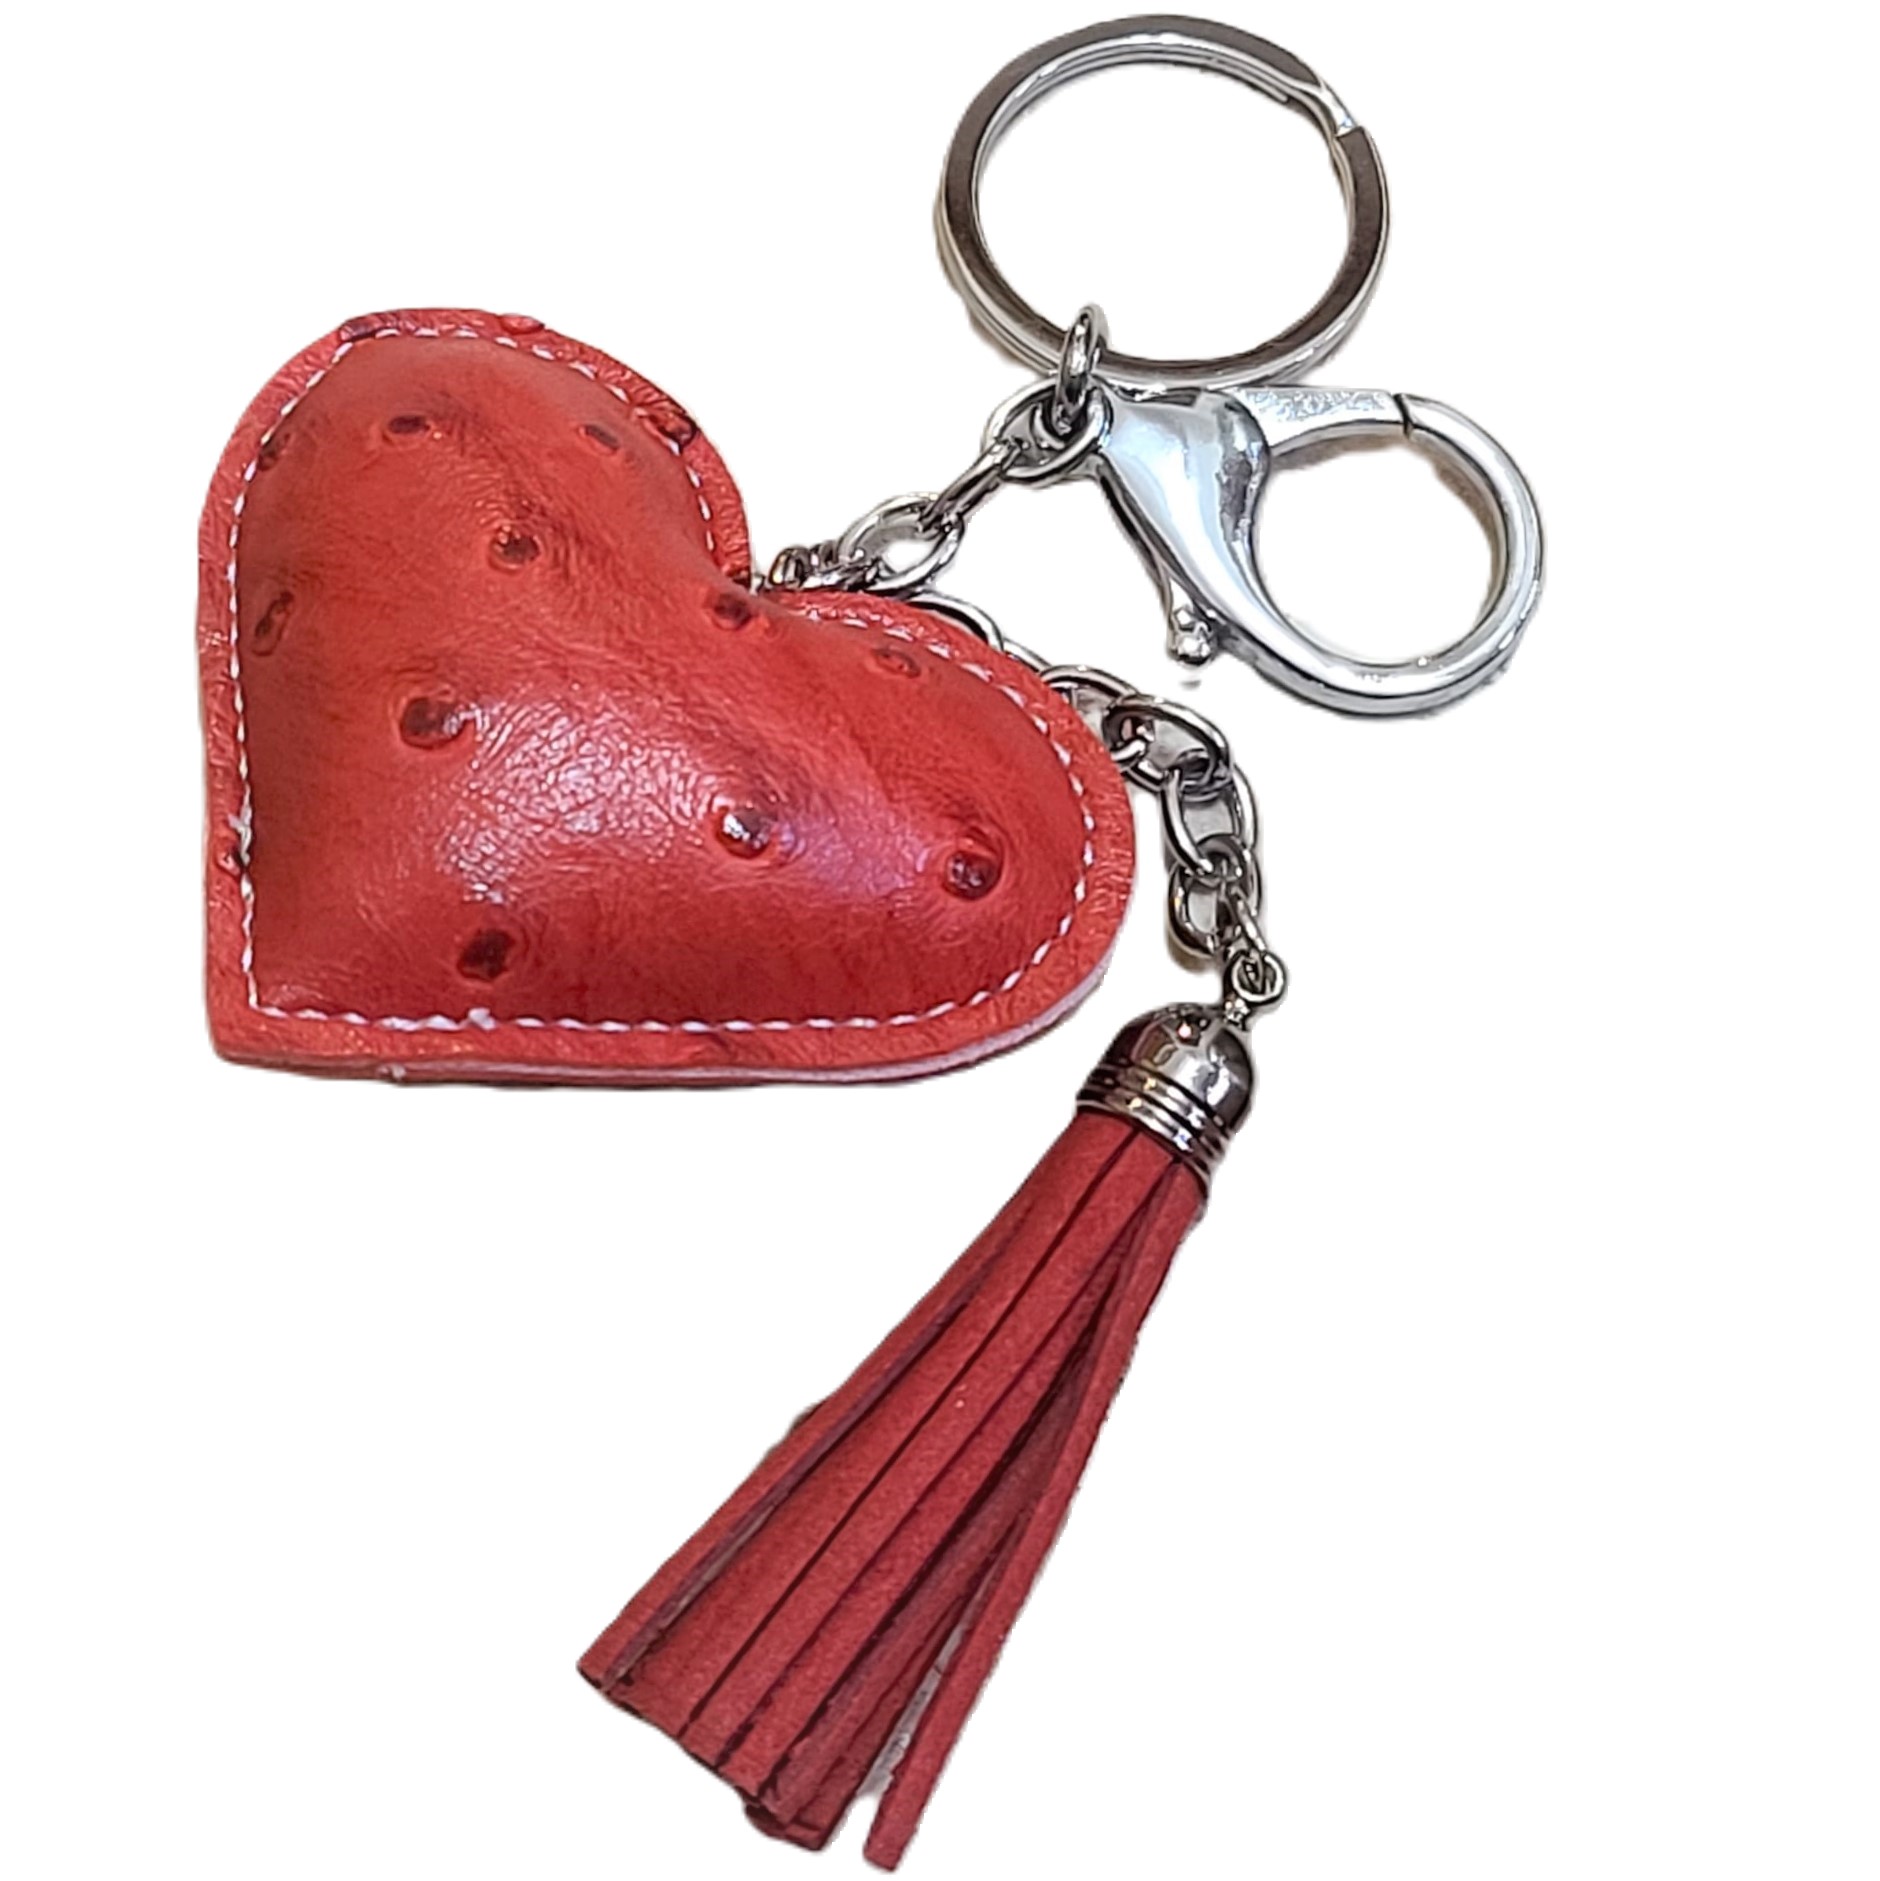 Key Chain - Red Heart with Tassel